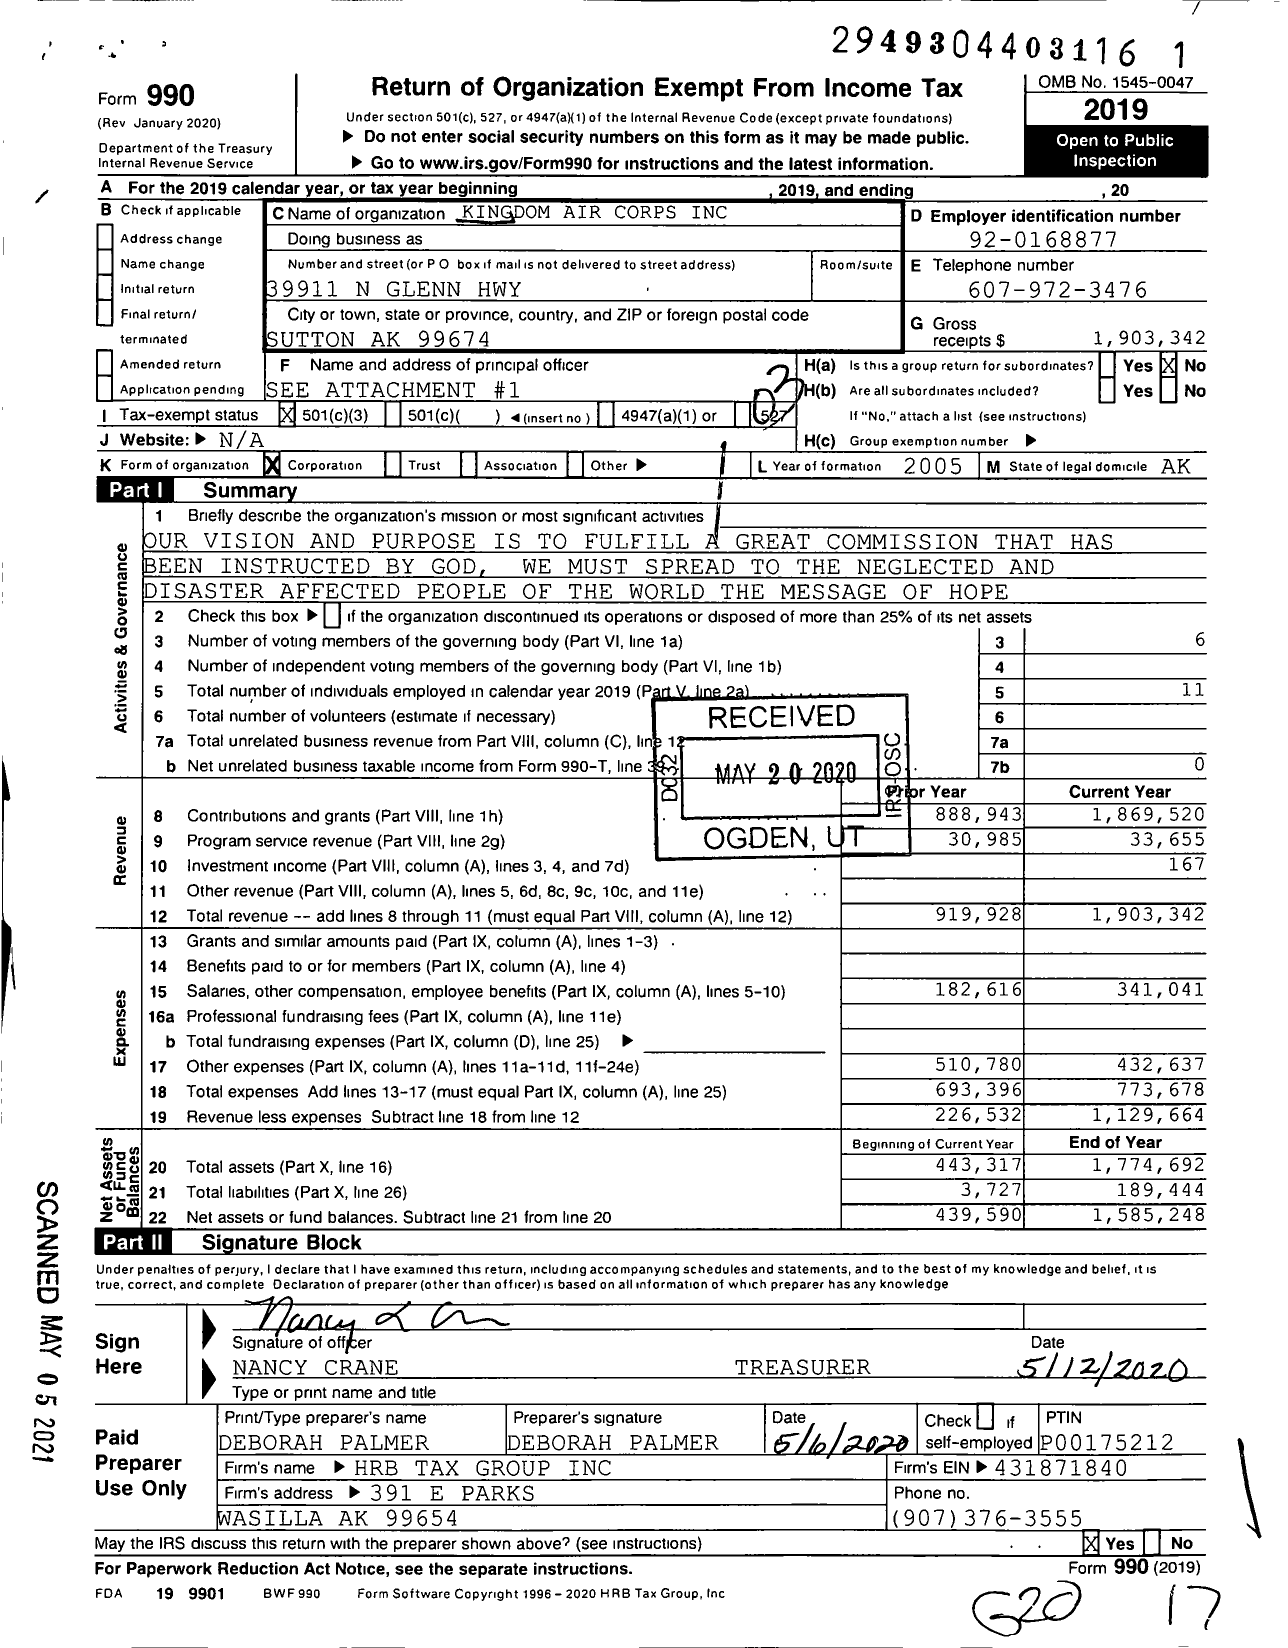 Image of first page of 2019 Form 990 for Kingdom Air Corps